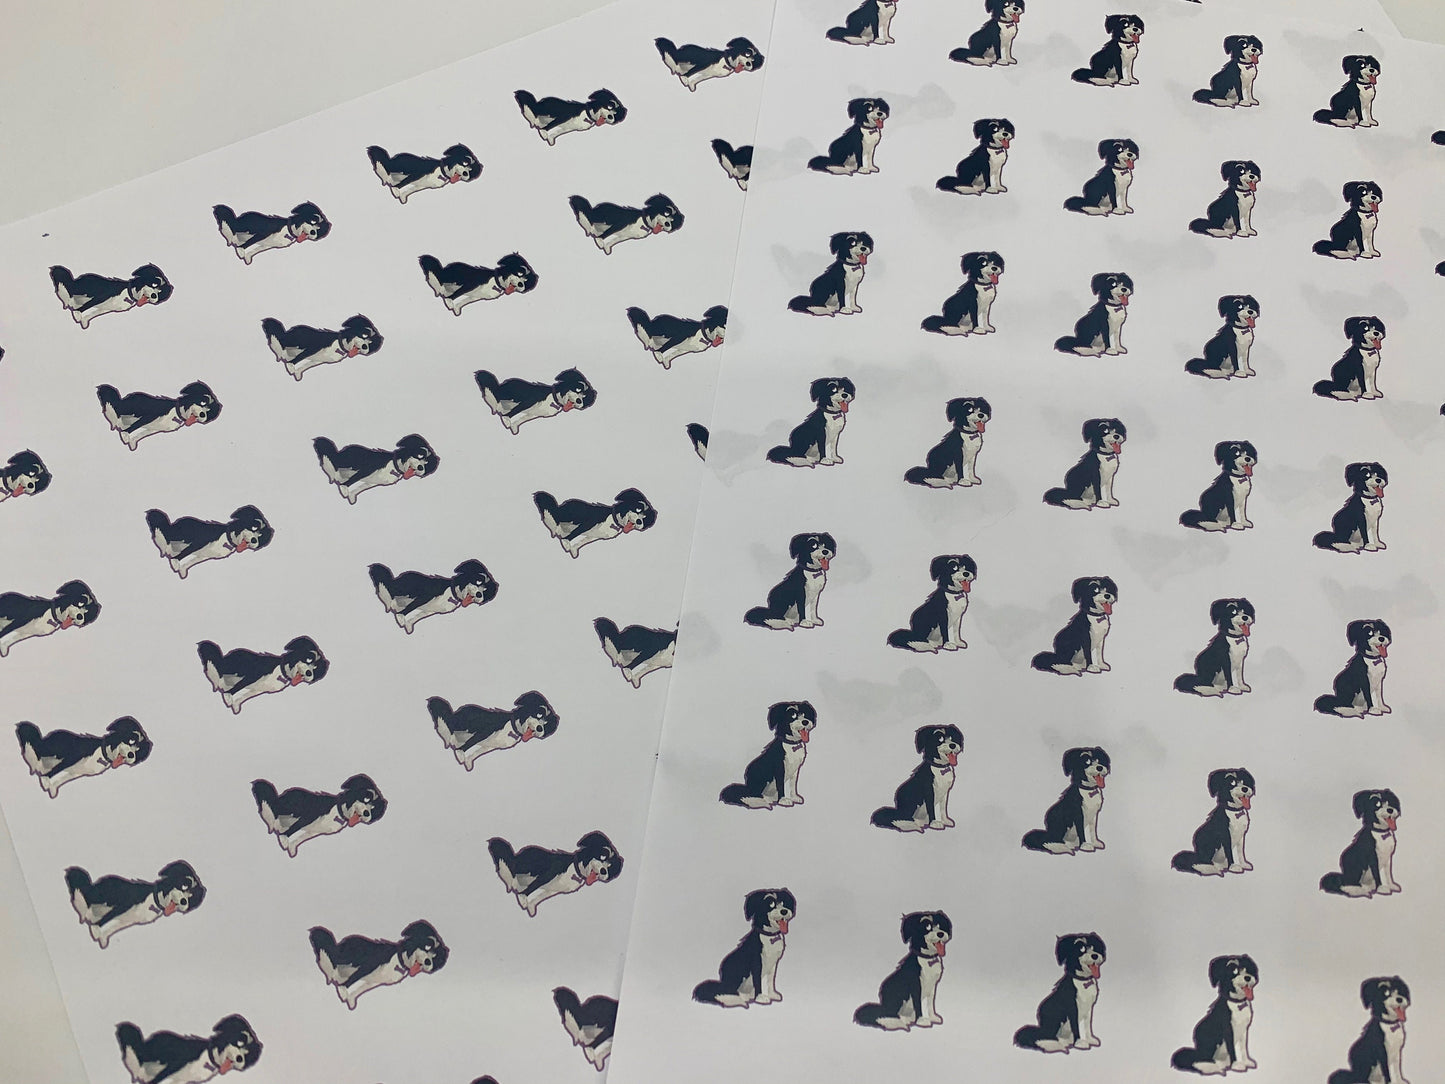 High Quality, Cute Dog Wrapping Paper A3 Size printed in full colour